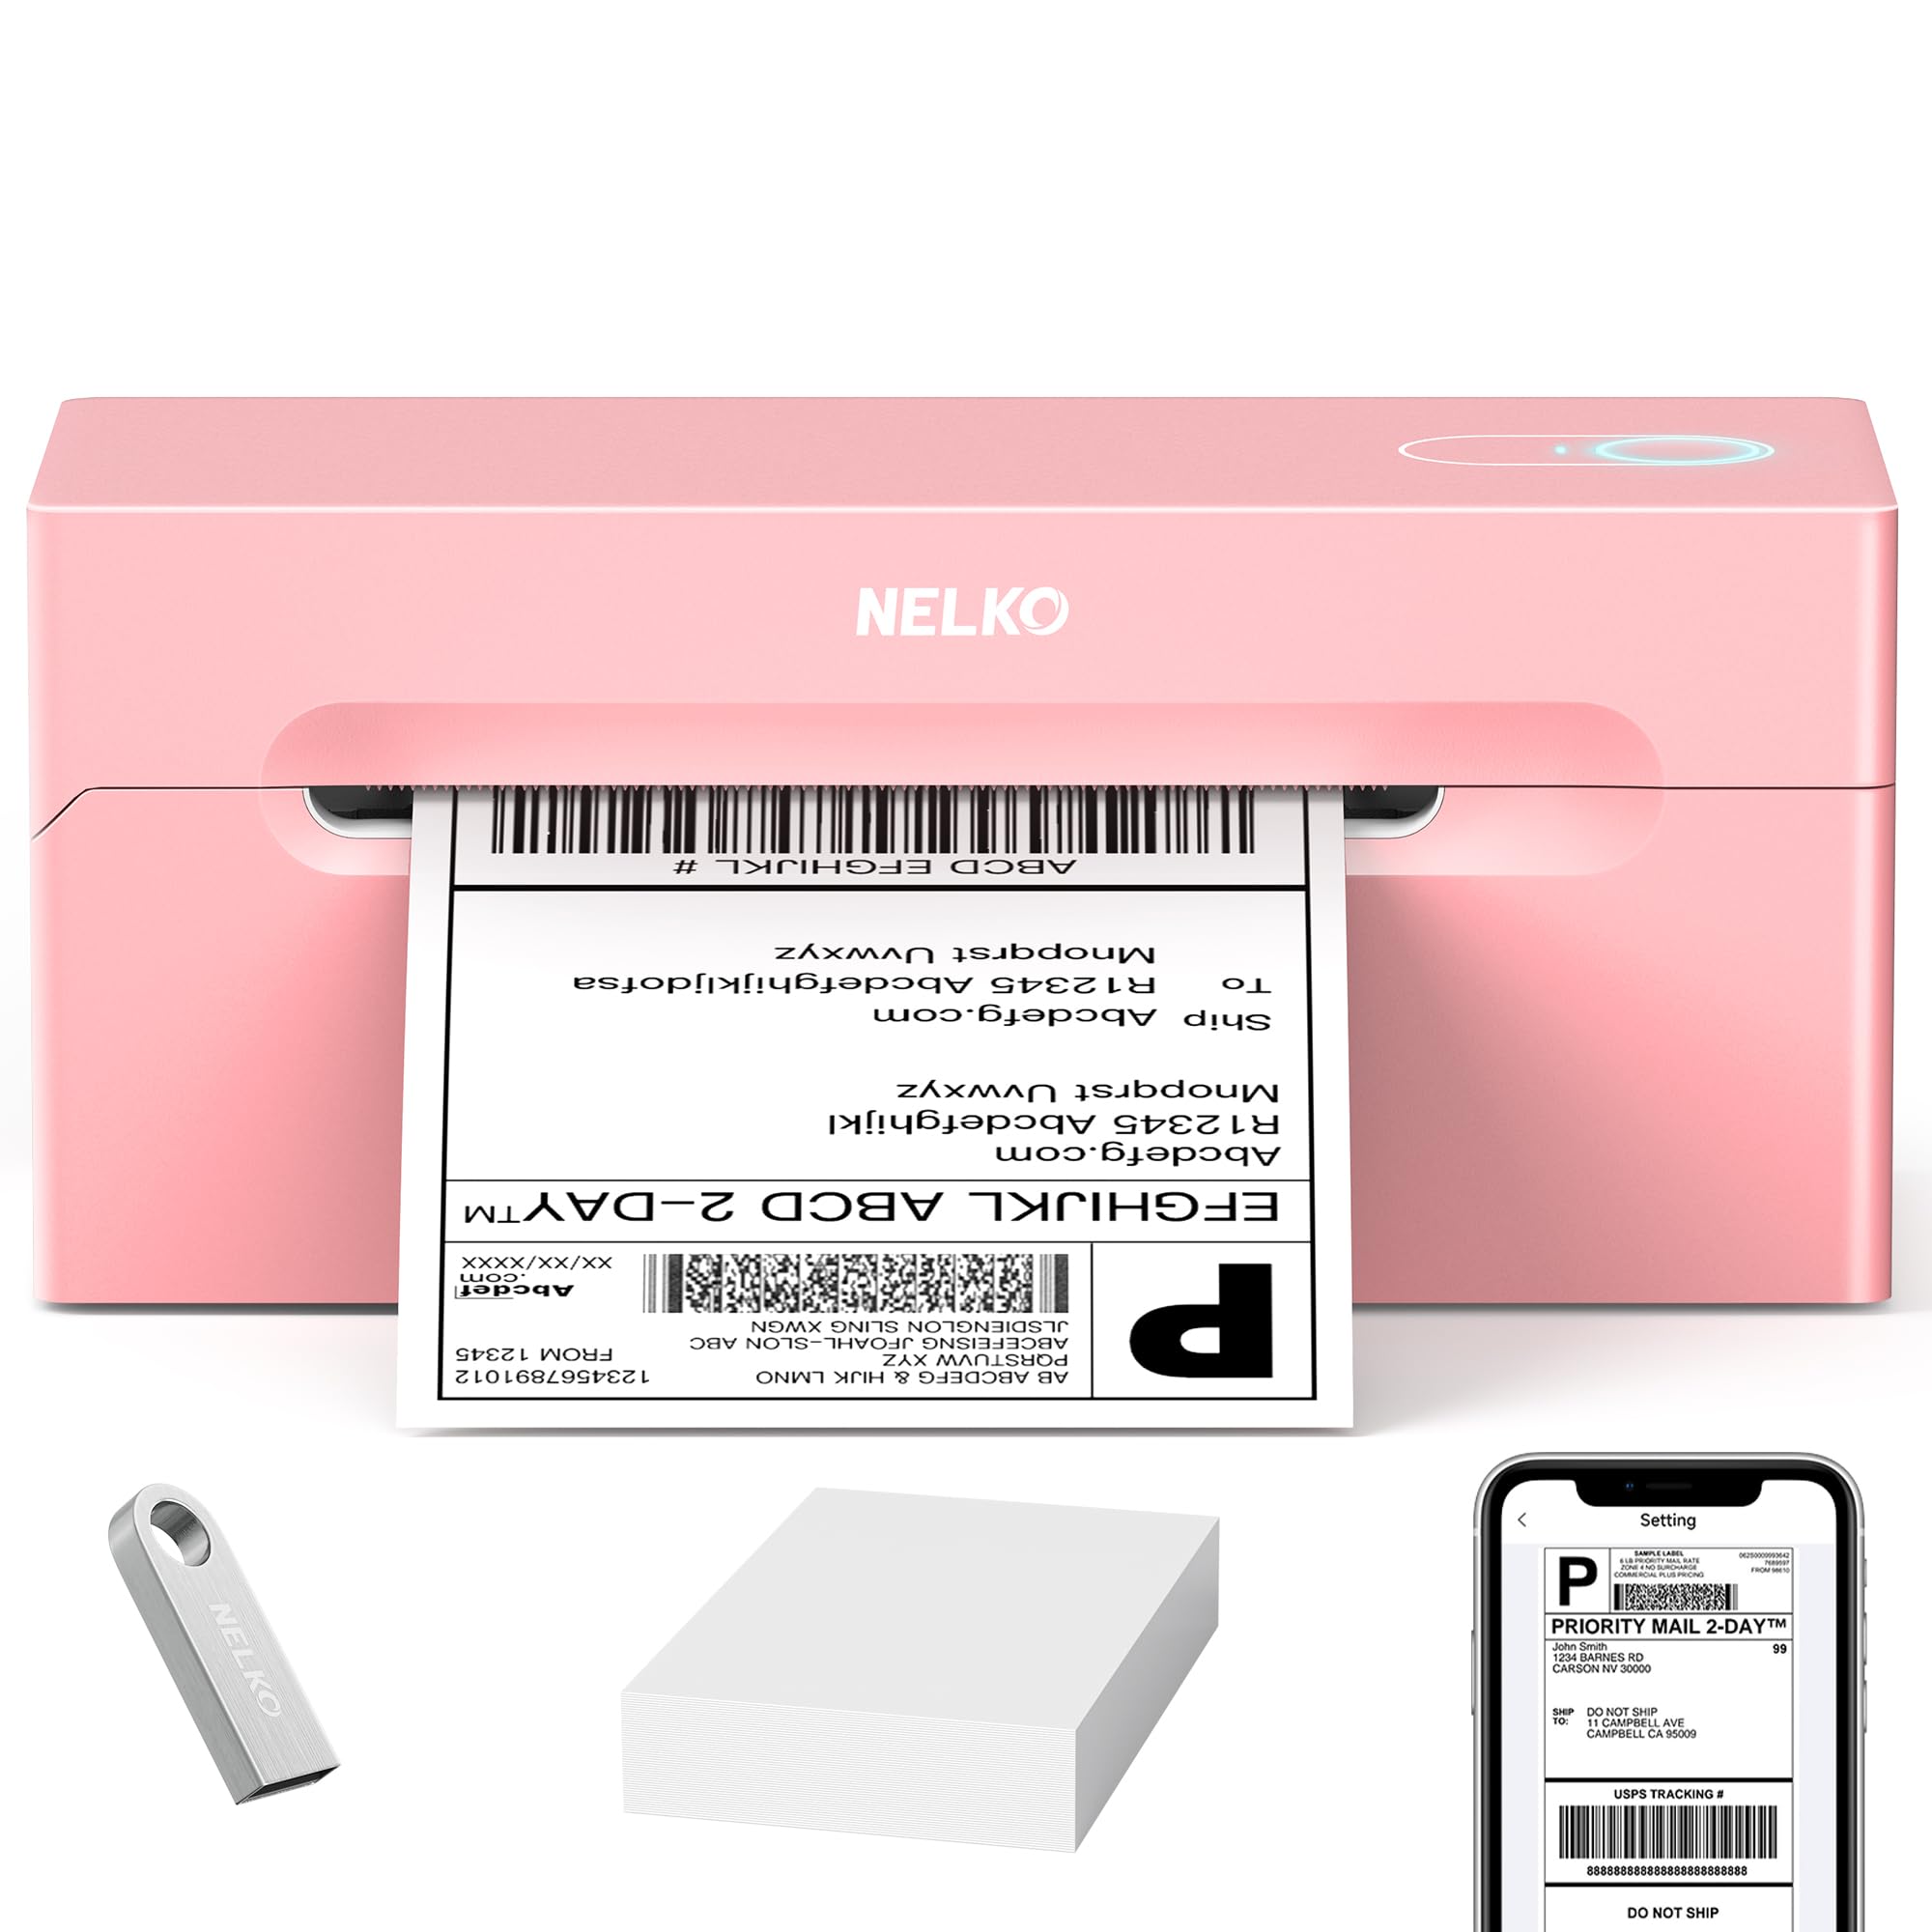 Nelko Bluetooth Thermal Shipping Label Printer PL70e(Pink